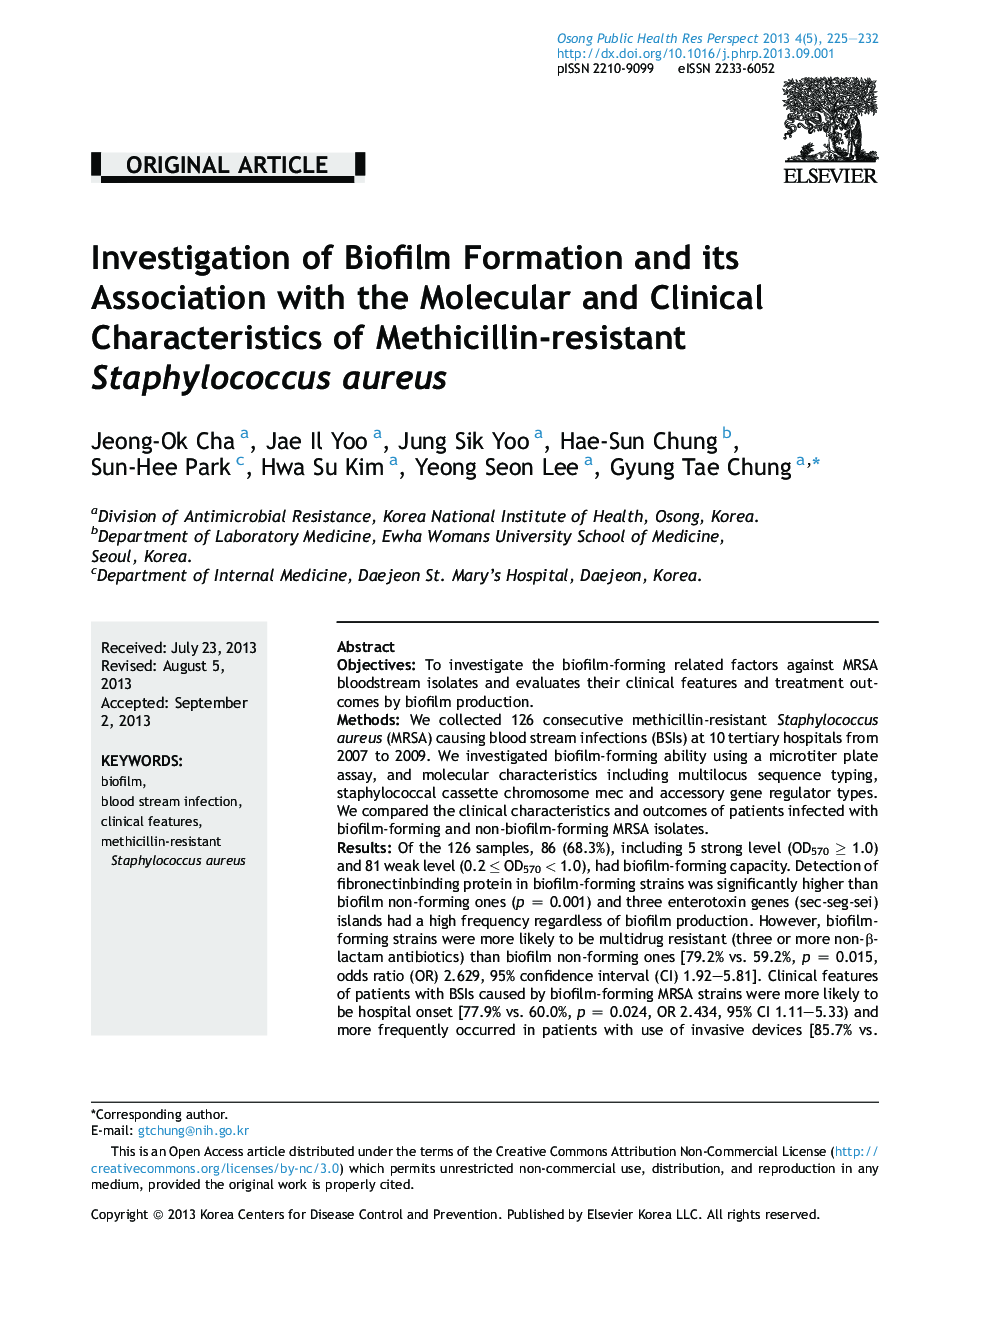 Investigation of Biofilm Formation and its Association with the Molecular and Clinical Characteristics of Methicillin-resistant Staphylococcus aureus 